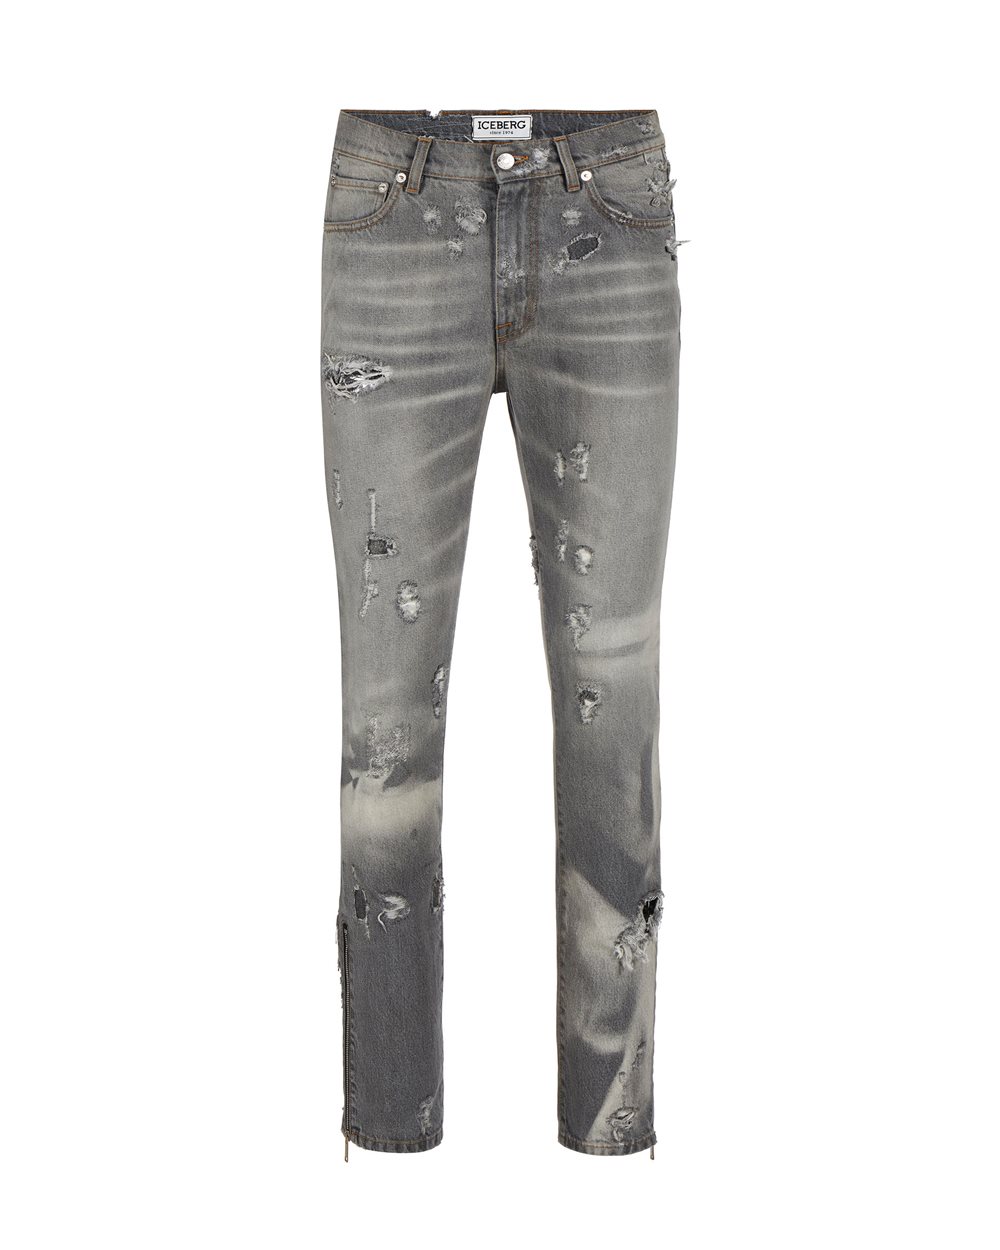 Gray washed jeans 5 pockets - Man | Iceberg - Official Website